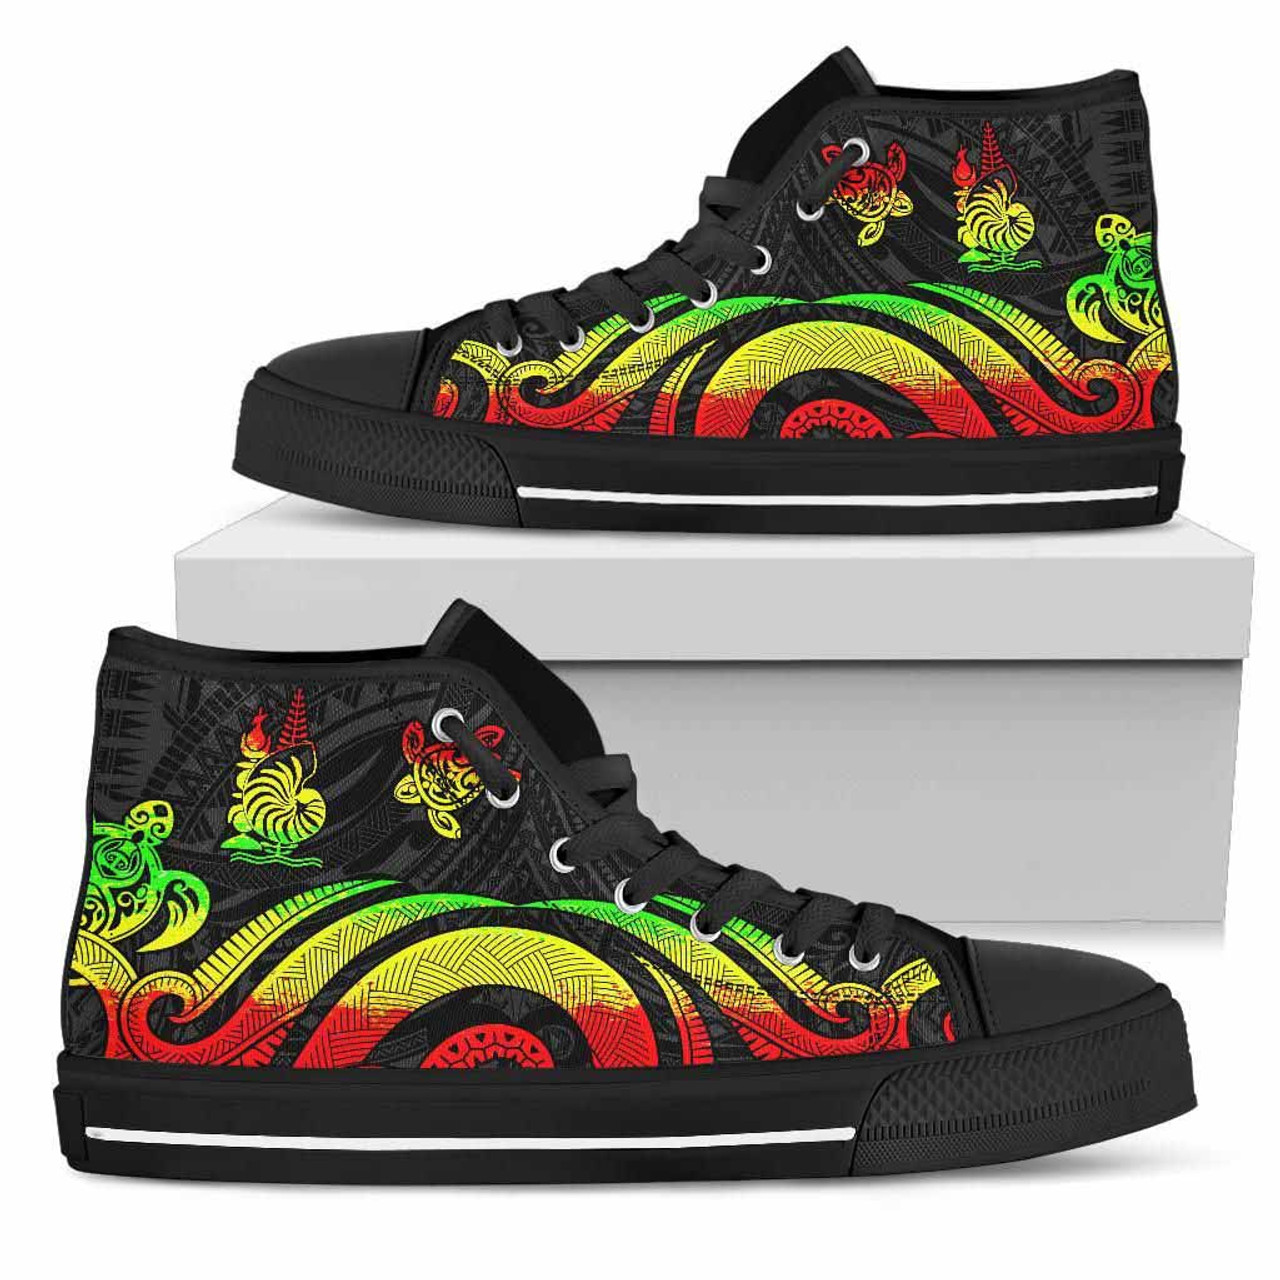 New Caledonia High Top Canvas Shoes - Reggae Tentacle Turtle 1